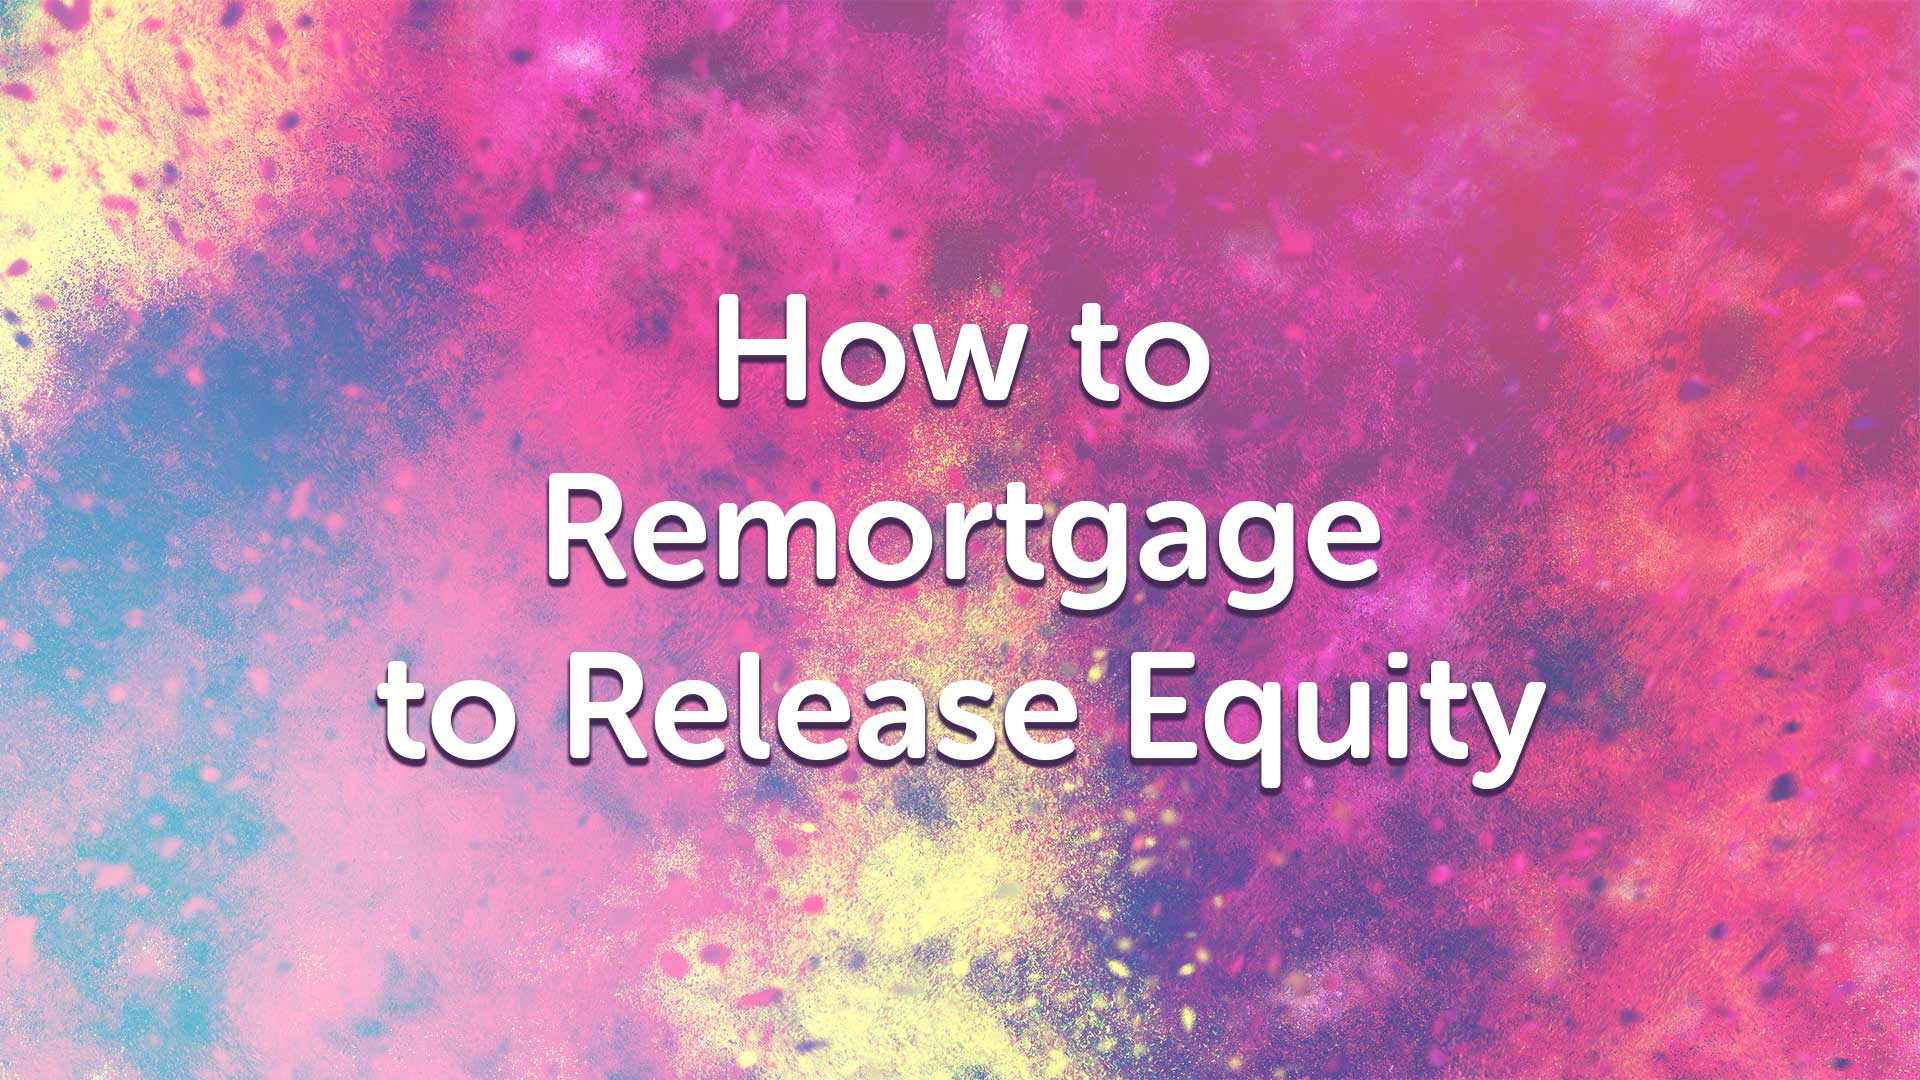 How to remortgage to release equity? | Remortgage Advice | Remortgage to Release Equity | Mortgage Advice by UK Moneyman